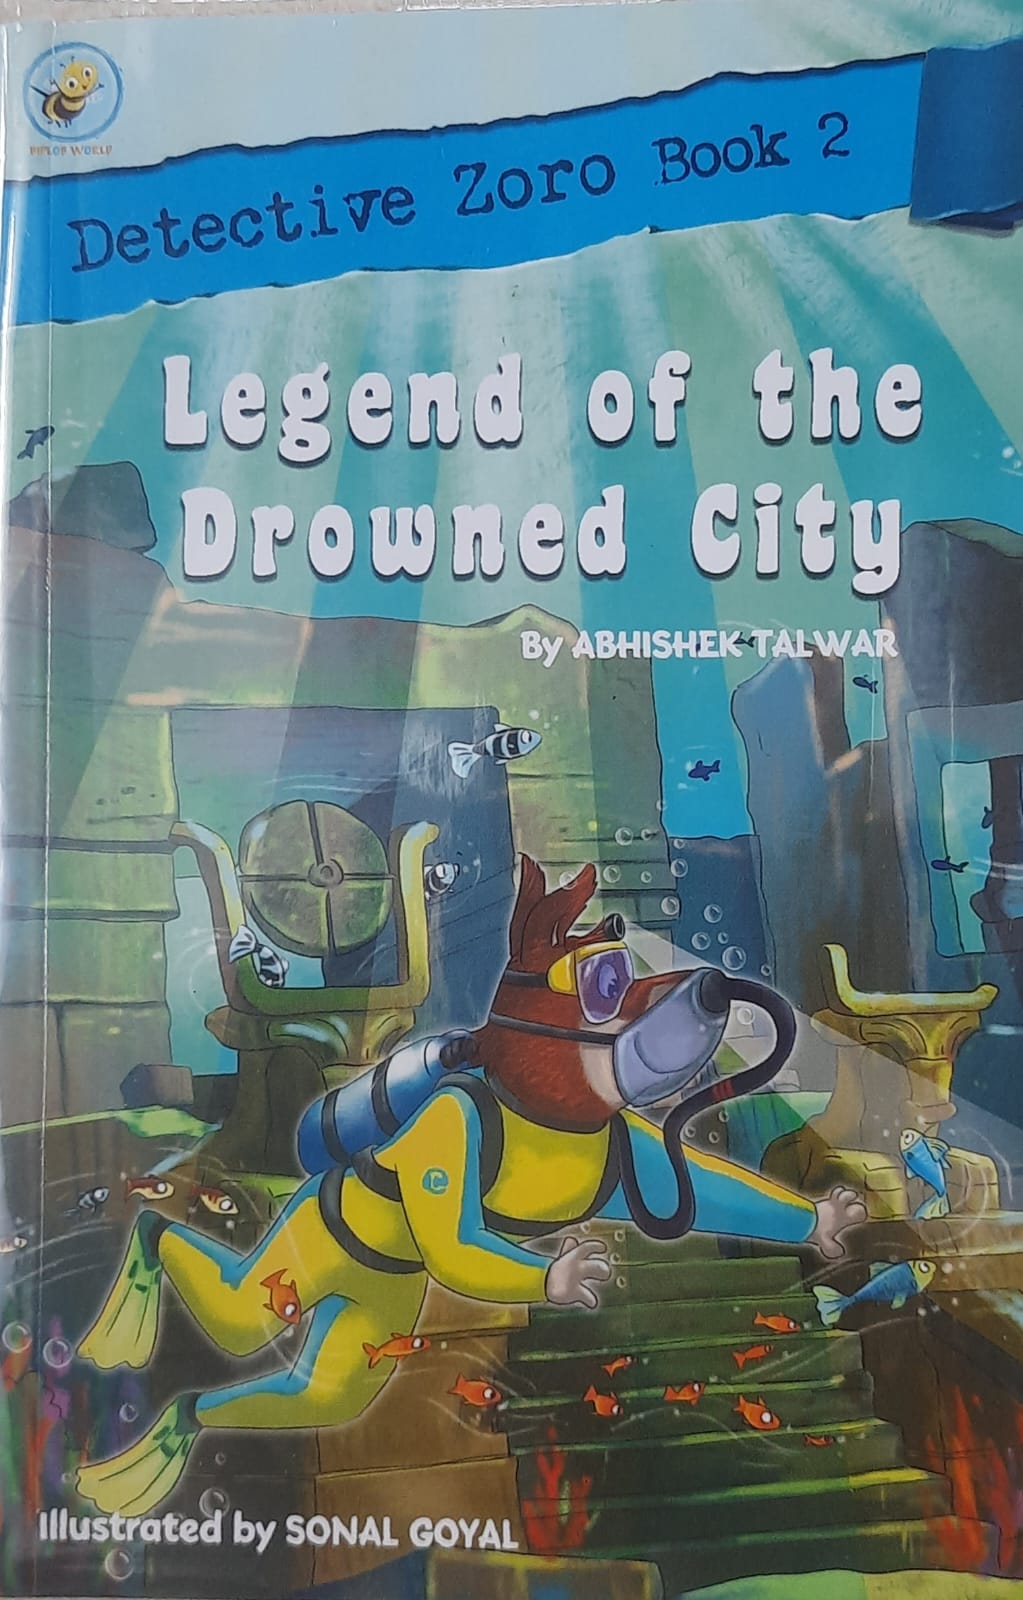 IMG : Detective Zoro Legend of the Drowned City Book 2